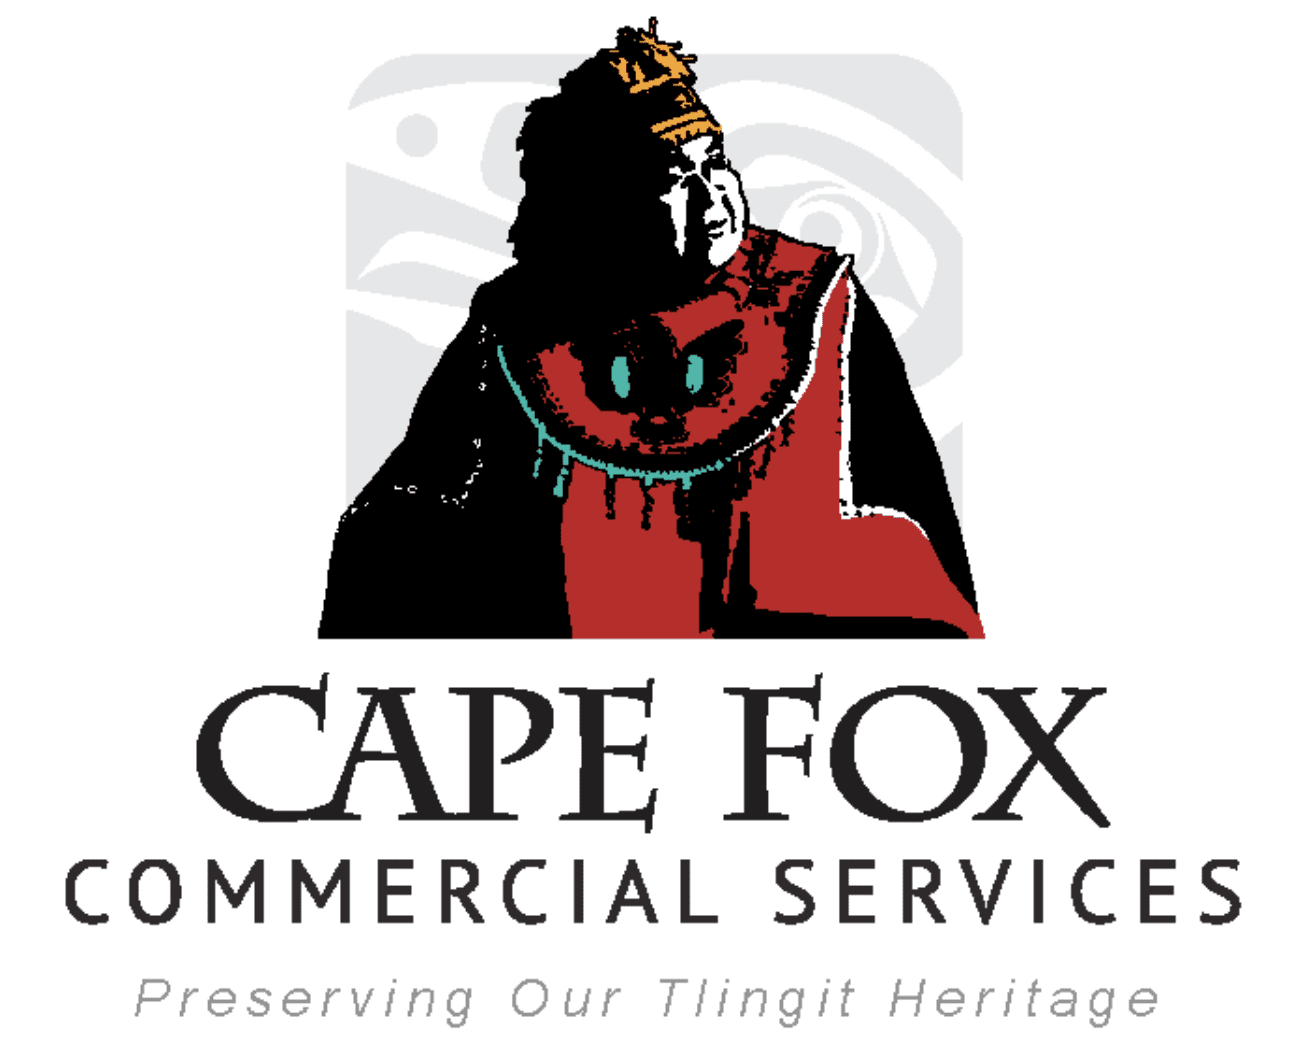 Cape Fox Commercial Services logo with the tagline "Preserving our Tlingit Heritage"